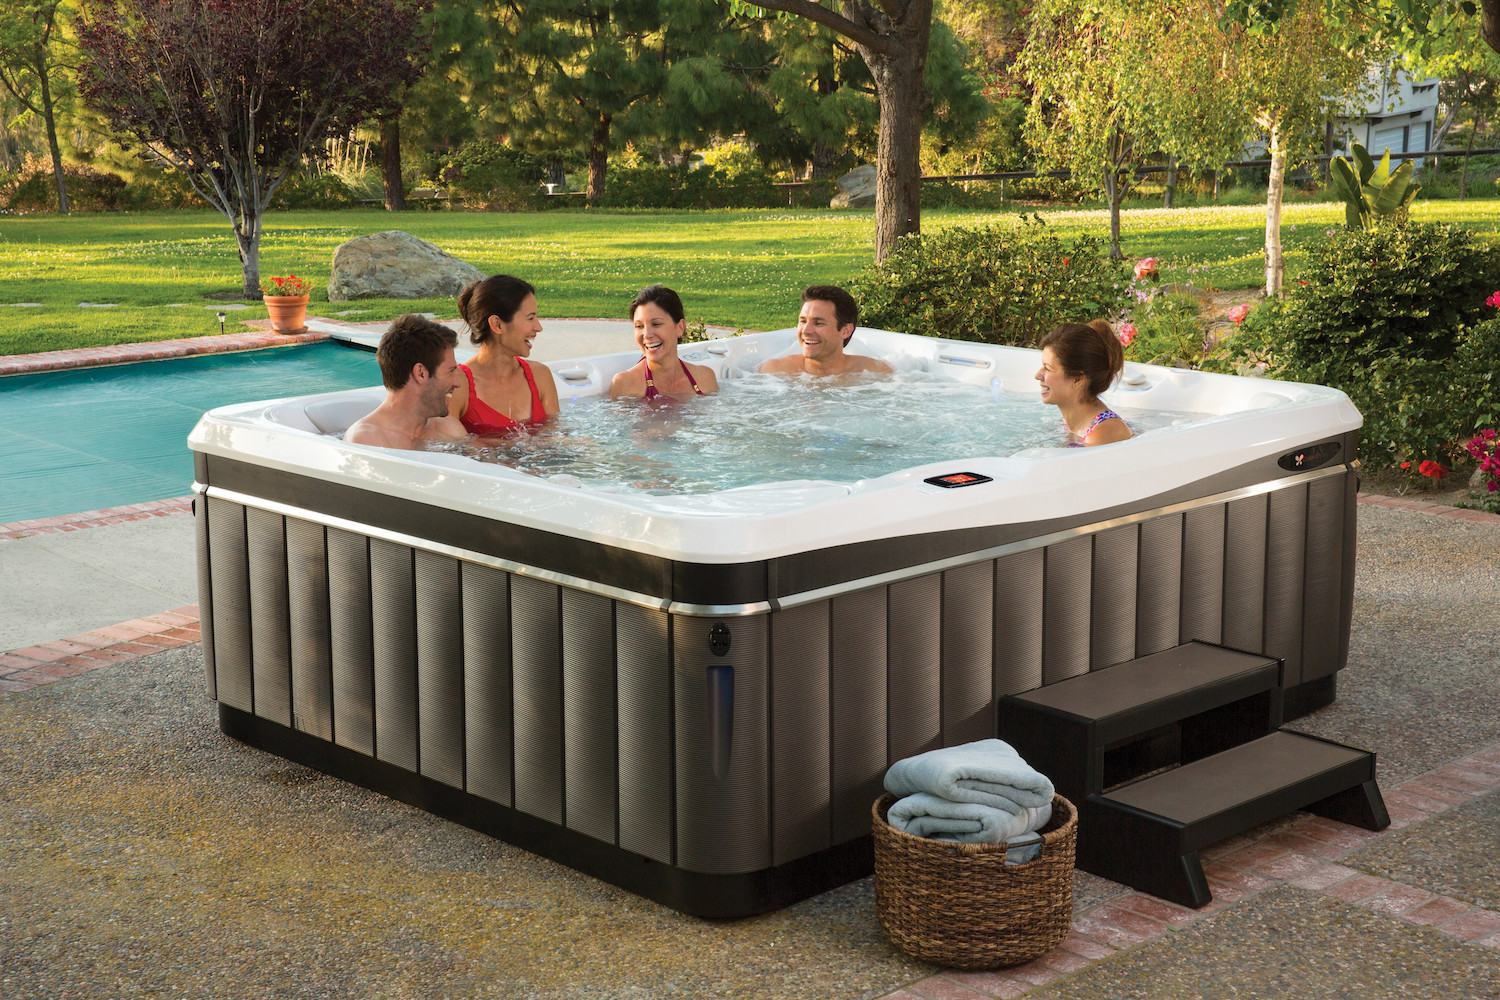 Bring everyone together with fun games in the hot tub.